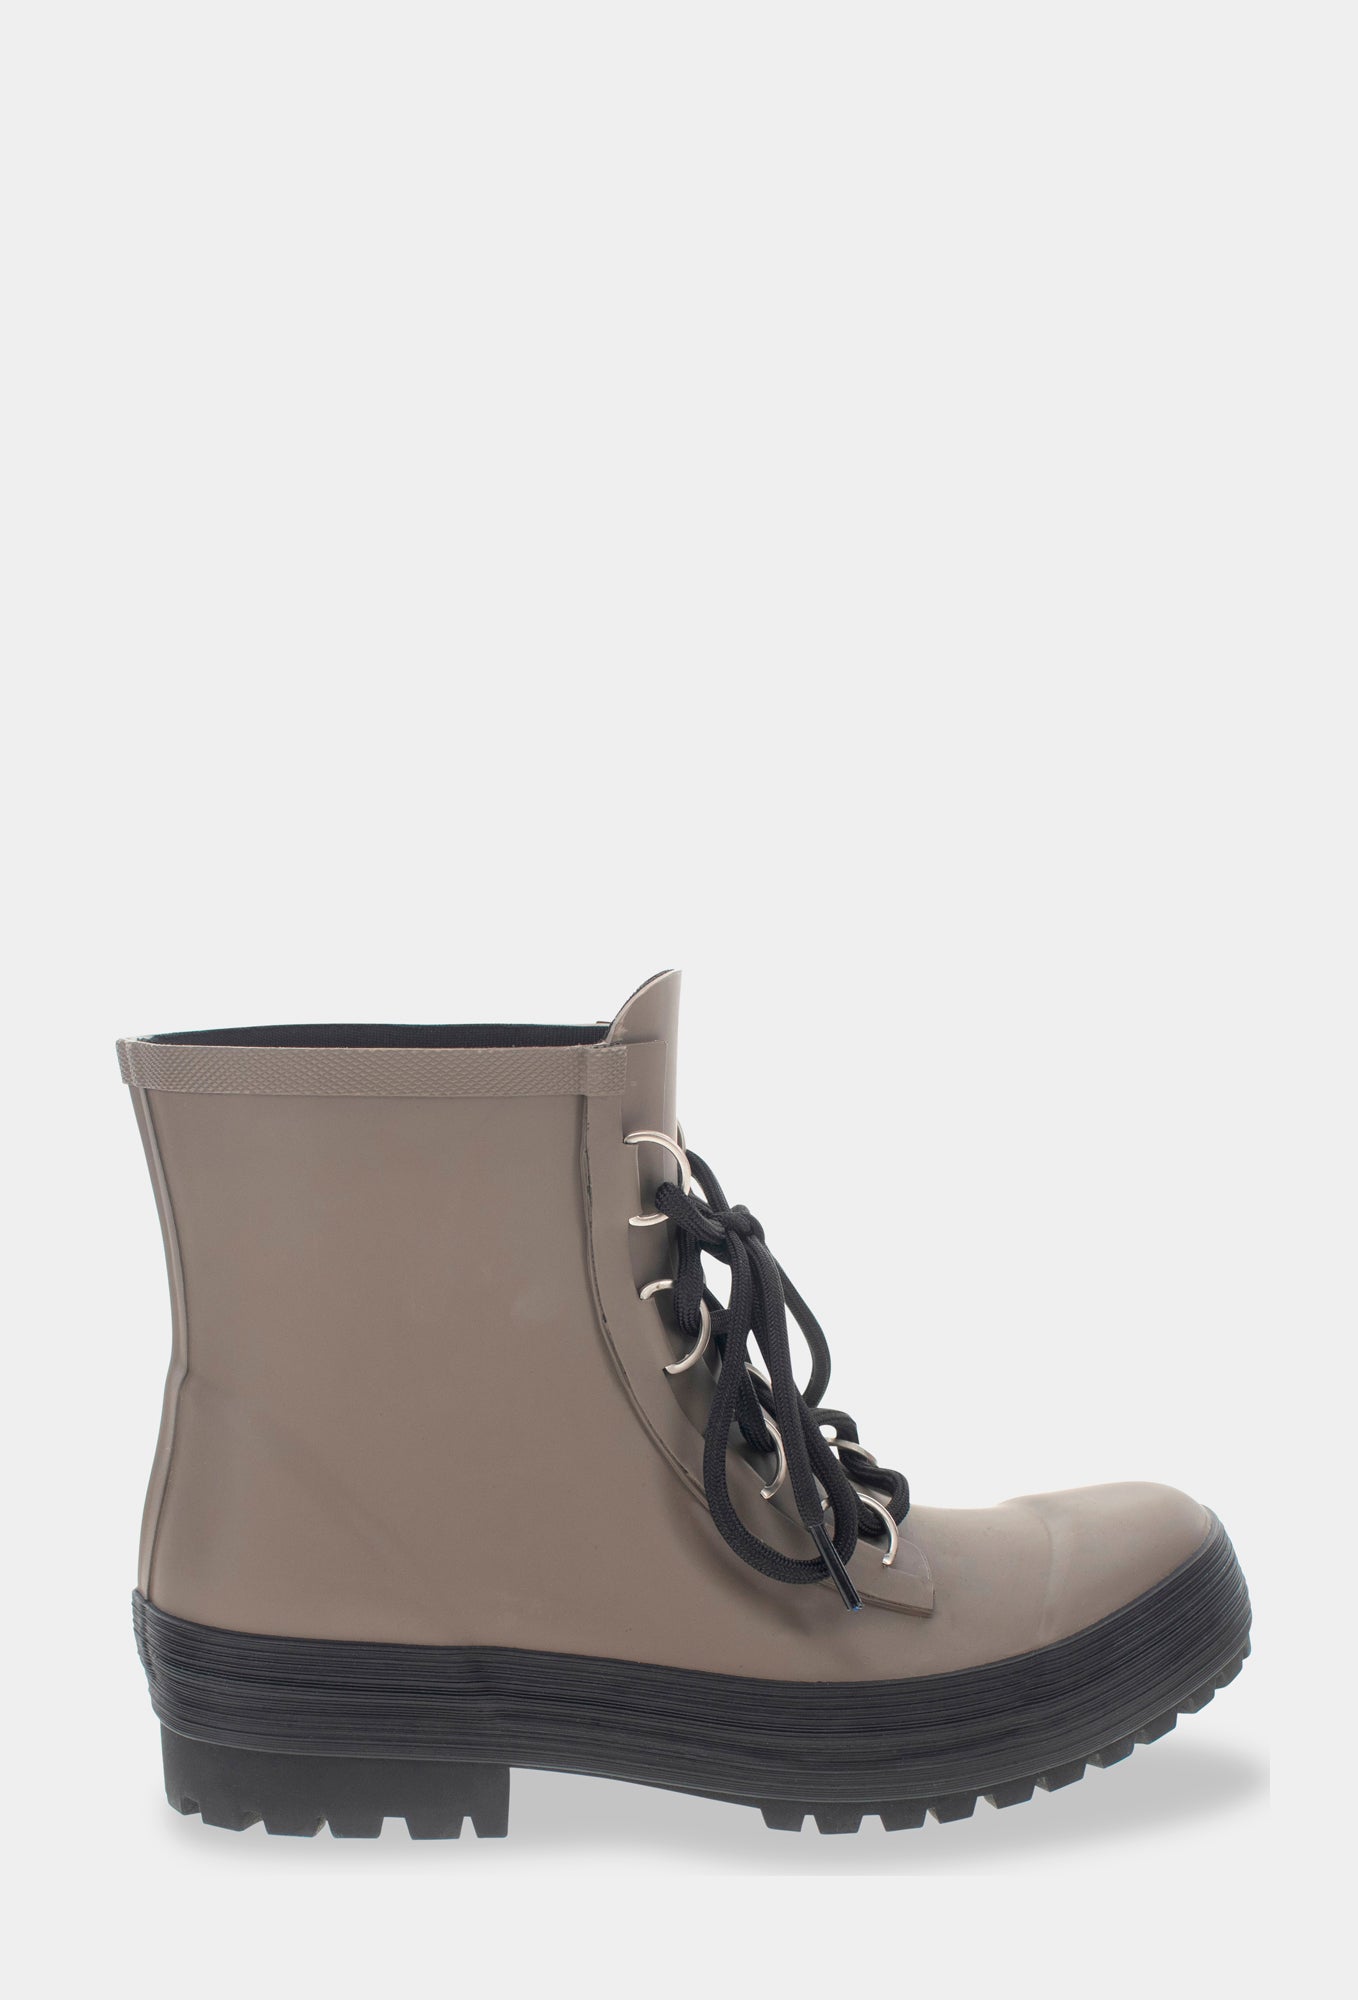 Chooka Boots | Ava Lace Up Ankle Rain Boot - Dark Taupe